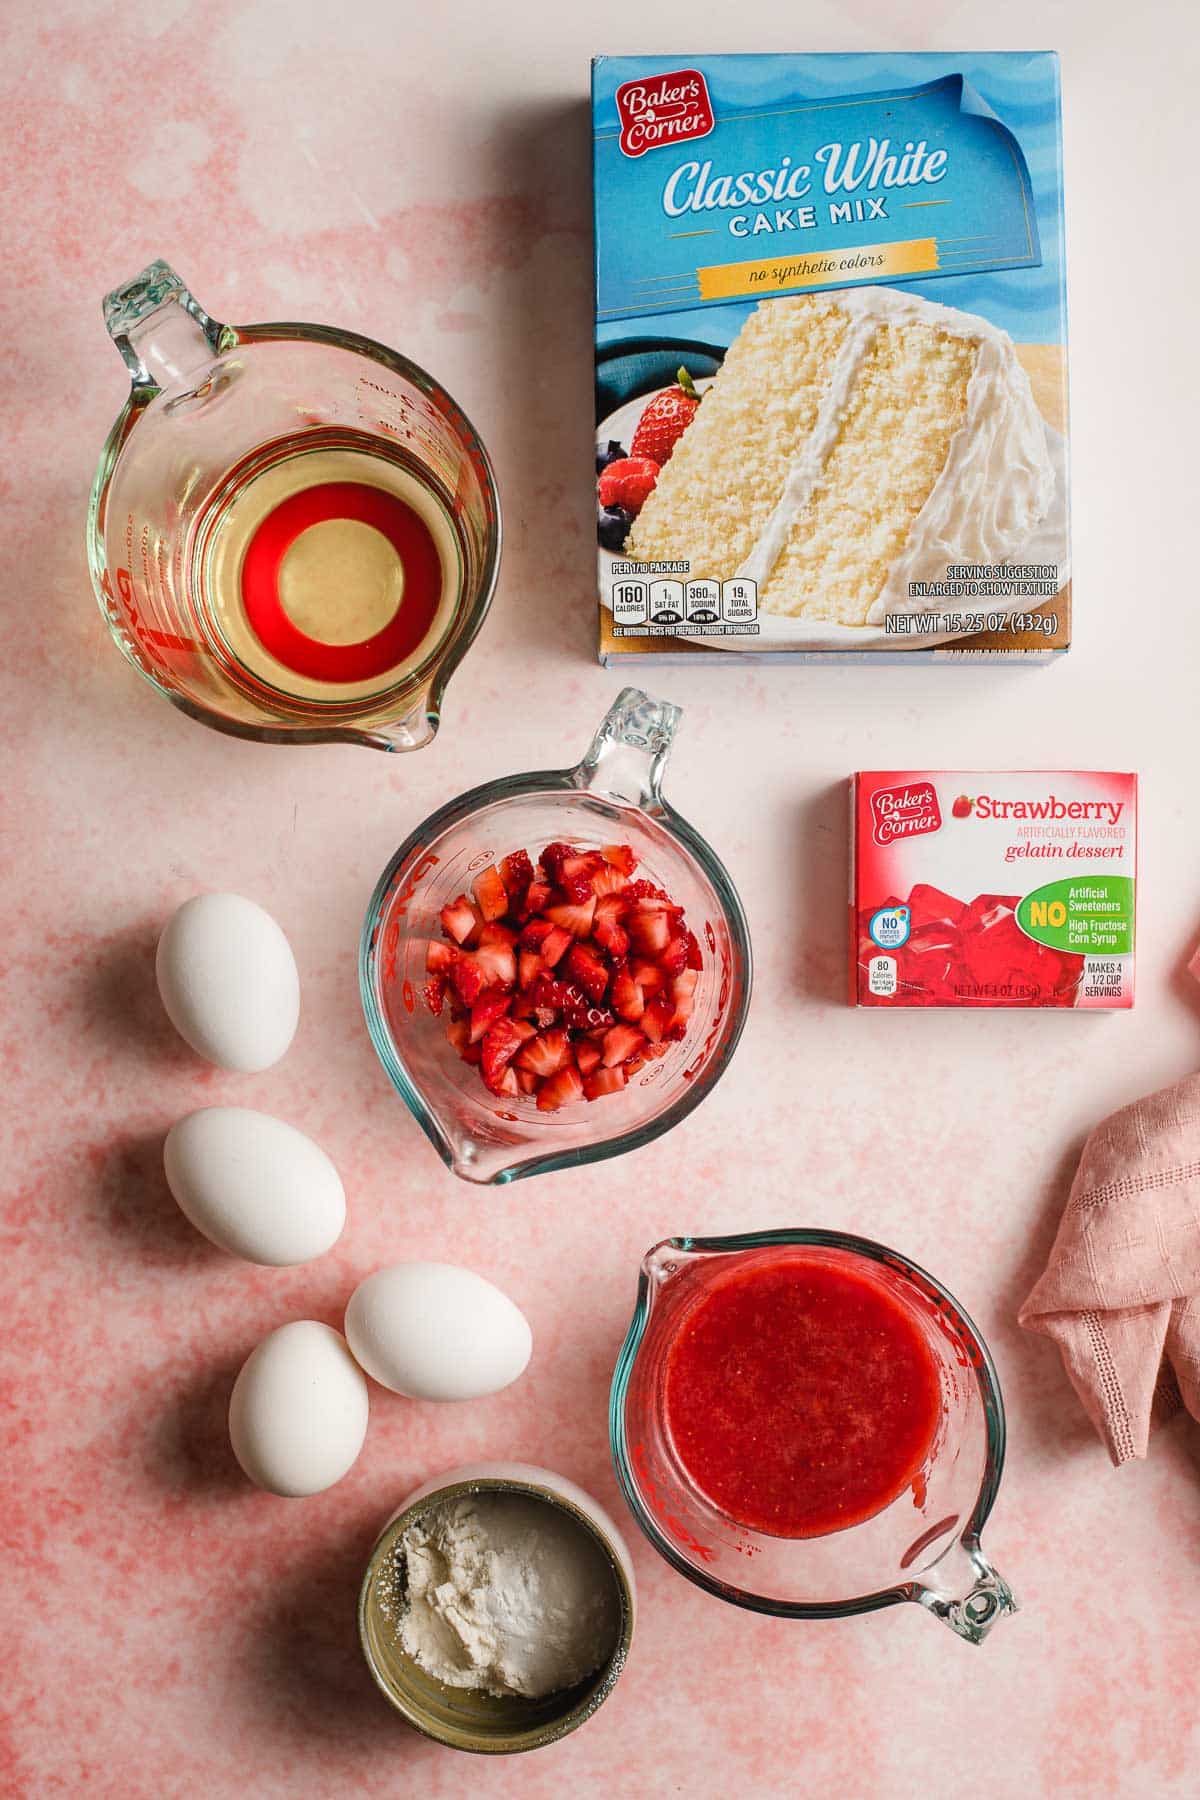 White confection mix, oil, eggs, chopped strawberries, pureed strawberries, and strawberry jello on a pink background.